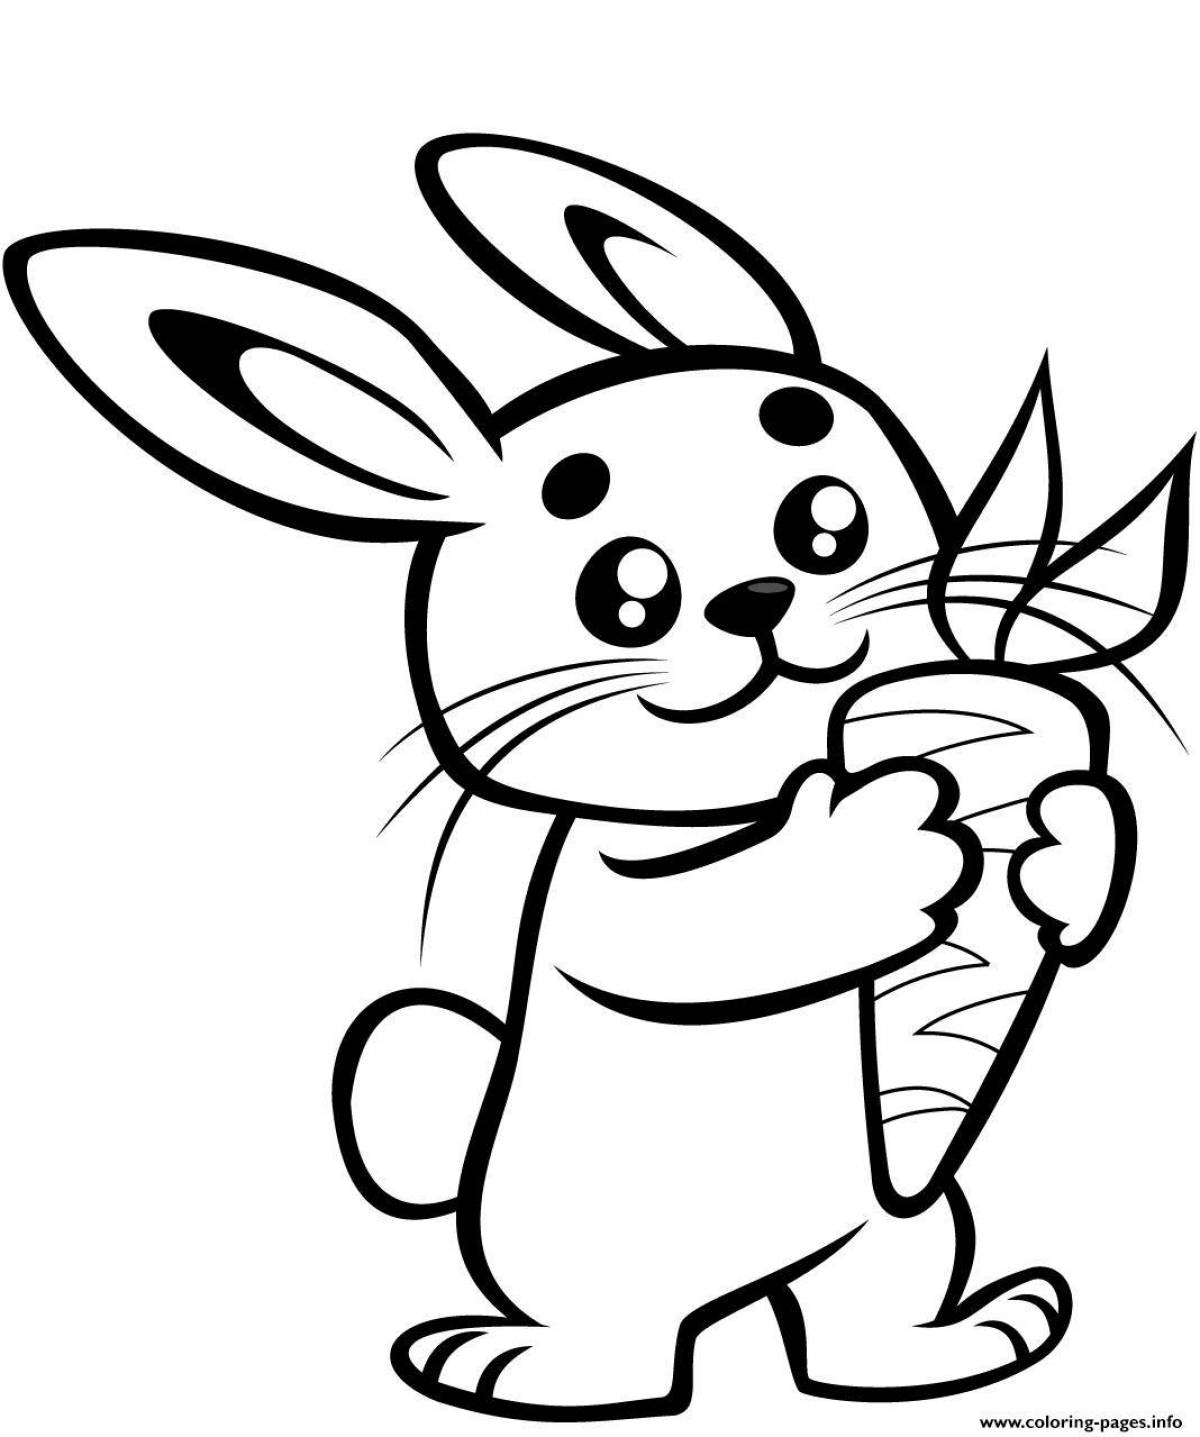 Coloring book happy rabbit for kids